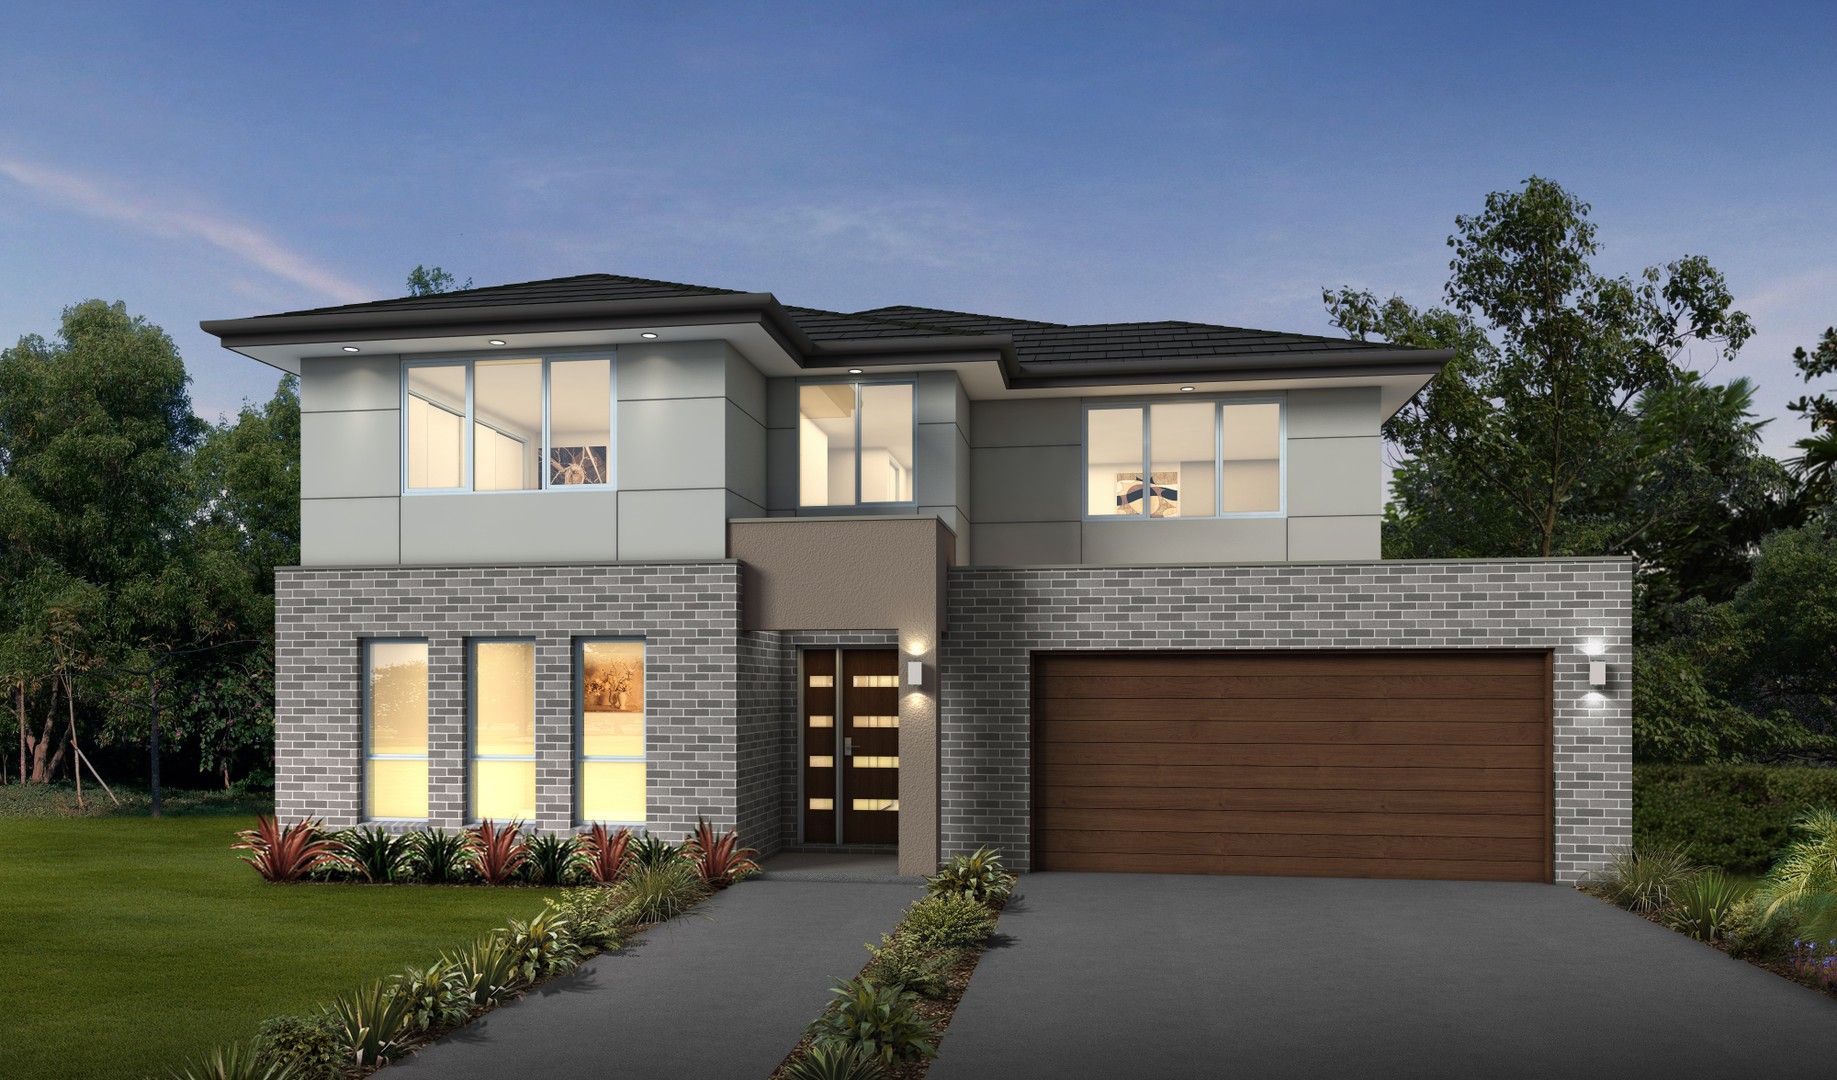 5 bedrooms New House & Land in Lot 246 Fig Crescent CAMERON PARK NSW, 2285